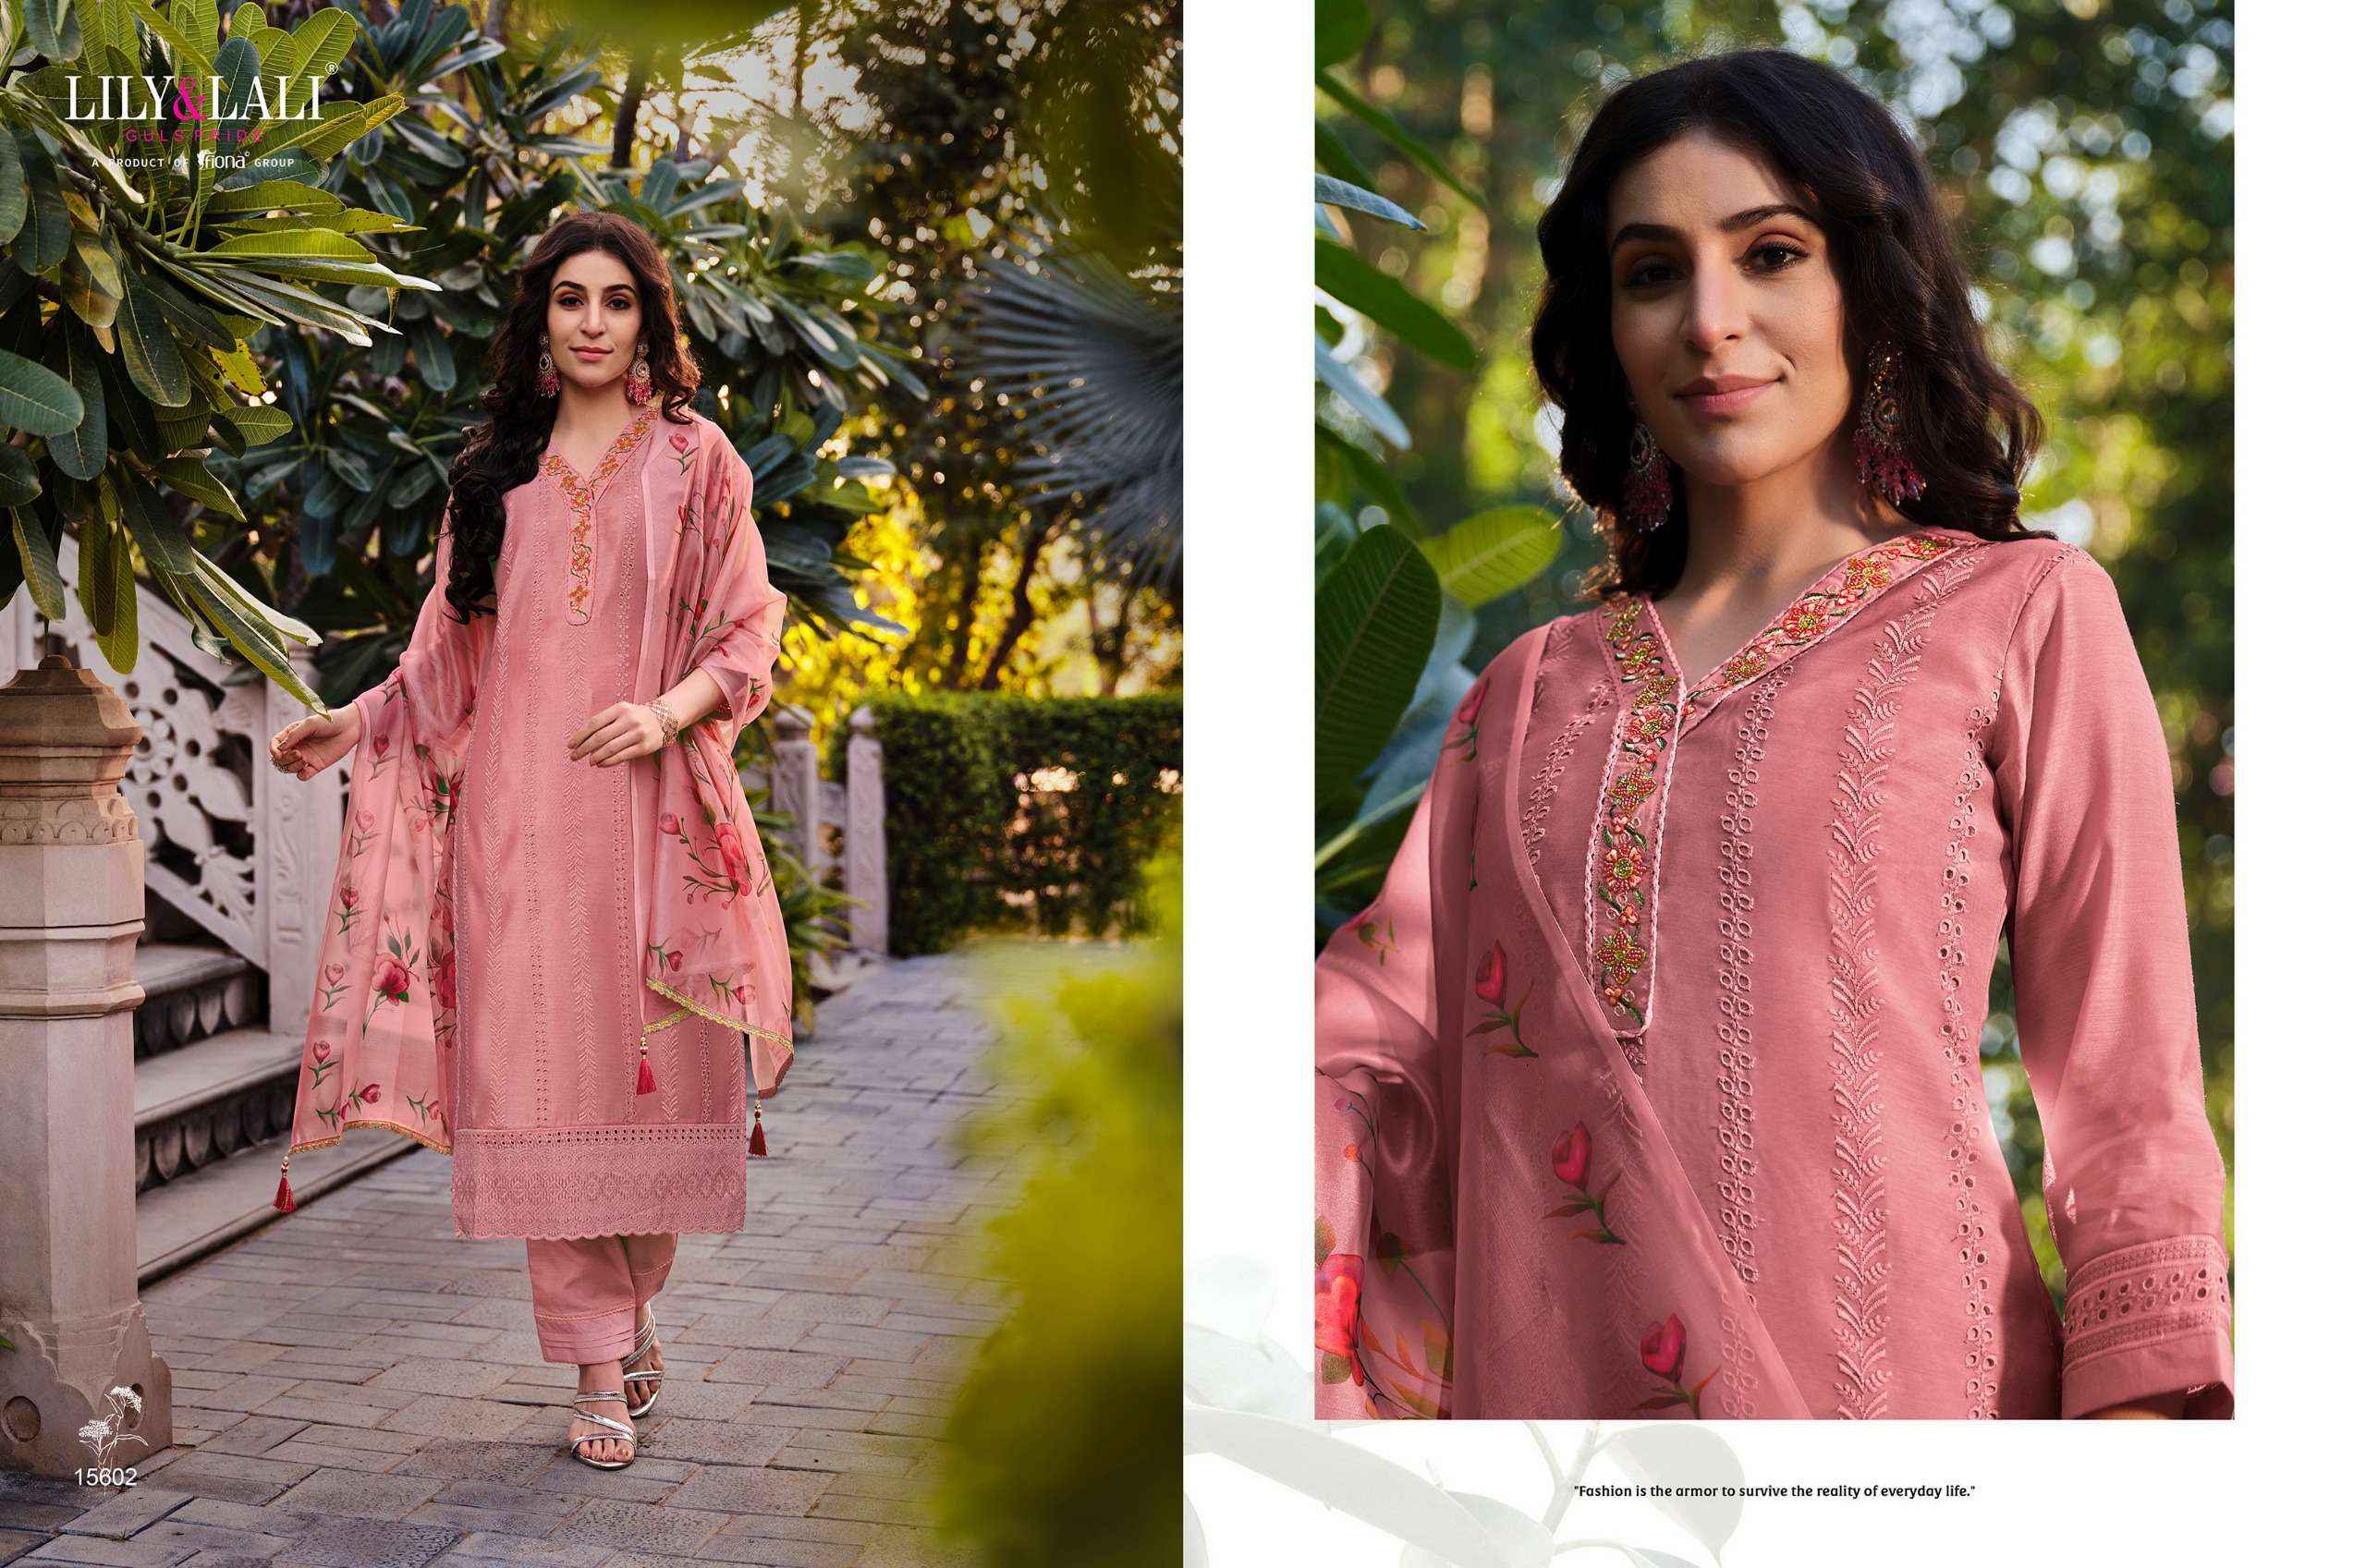 LILY AND LALI LUCKNOWI VOL -3 READYMADE SUITS